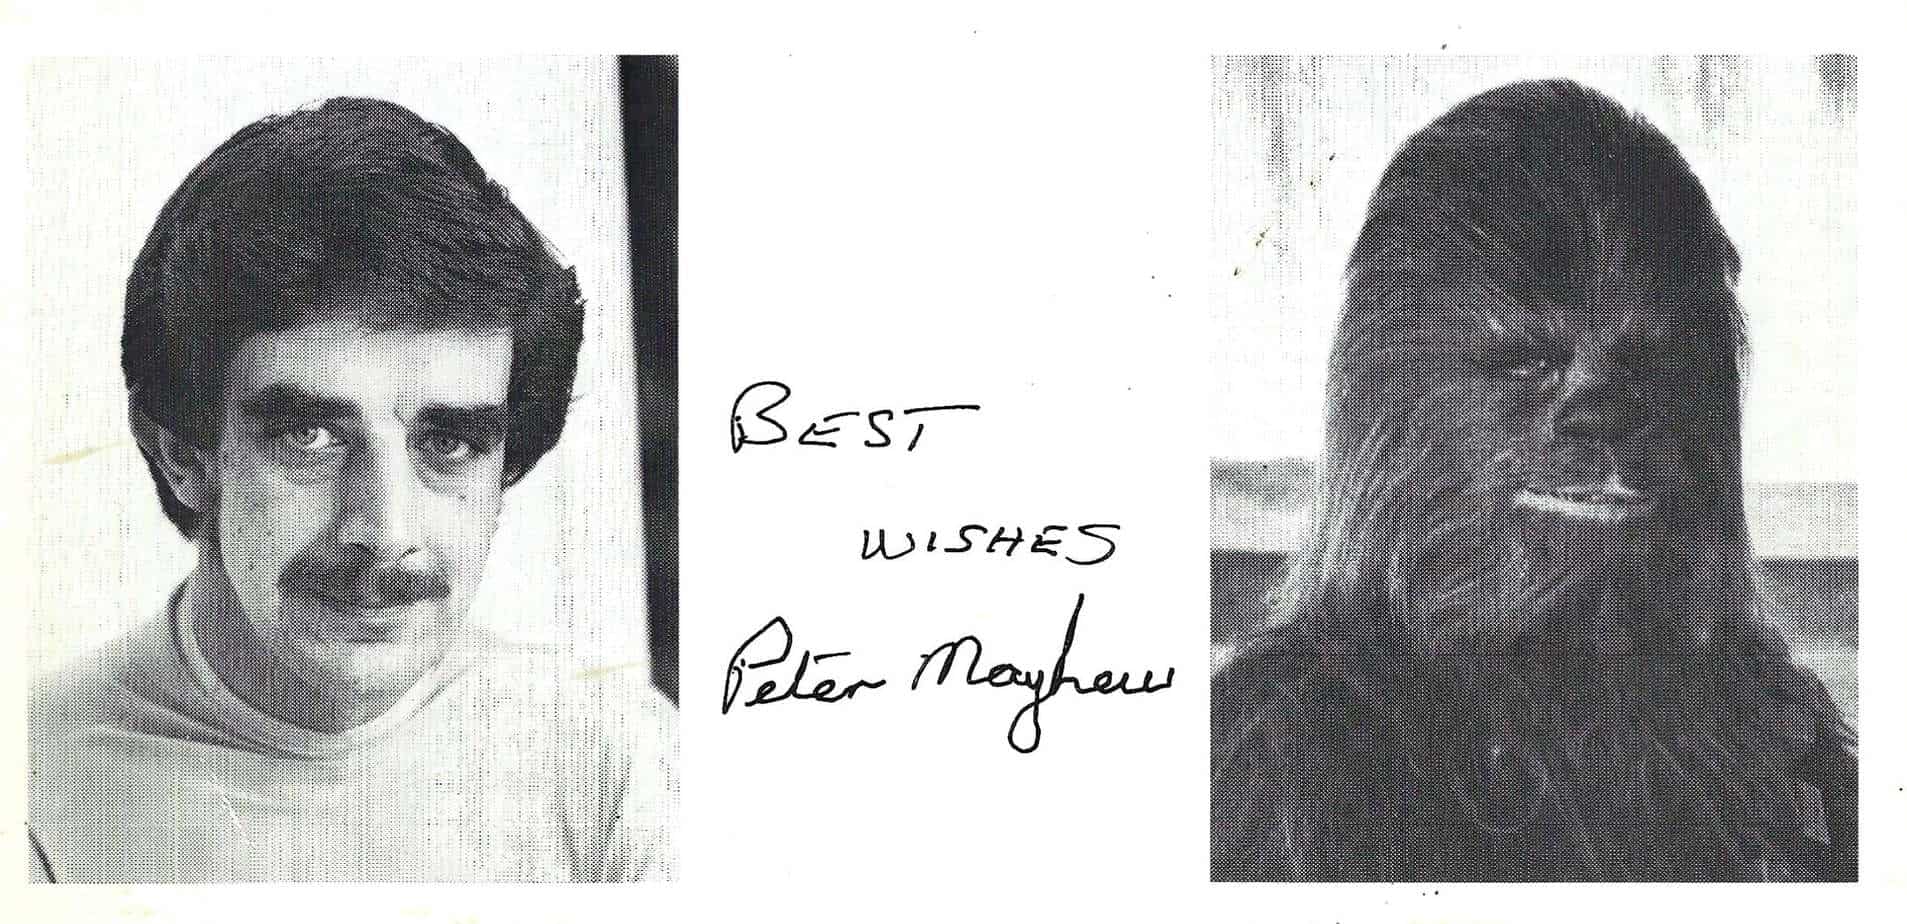 Pre-printed autograph from Peter Mayhew. Obtained through the mail (TTM) from the Official Star Wars Fan Club.